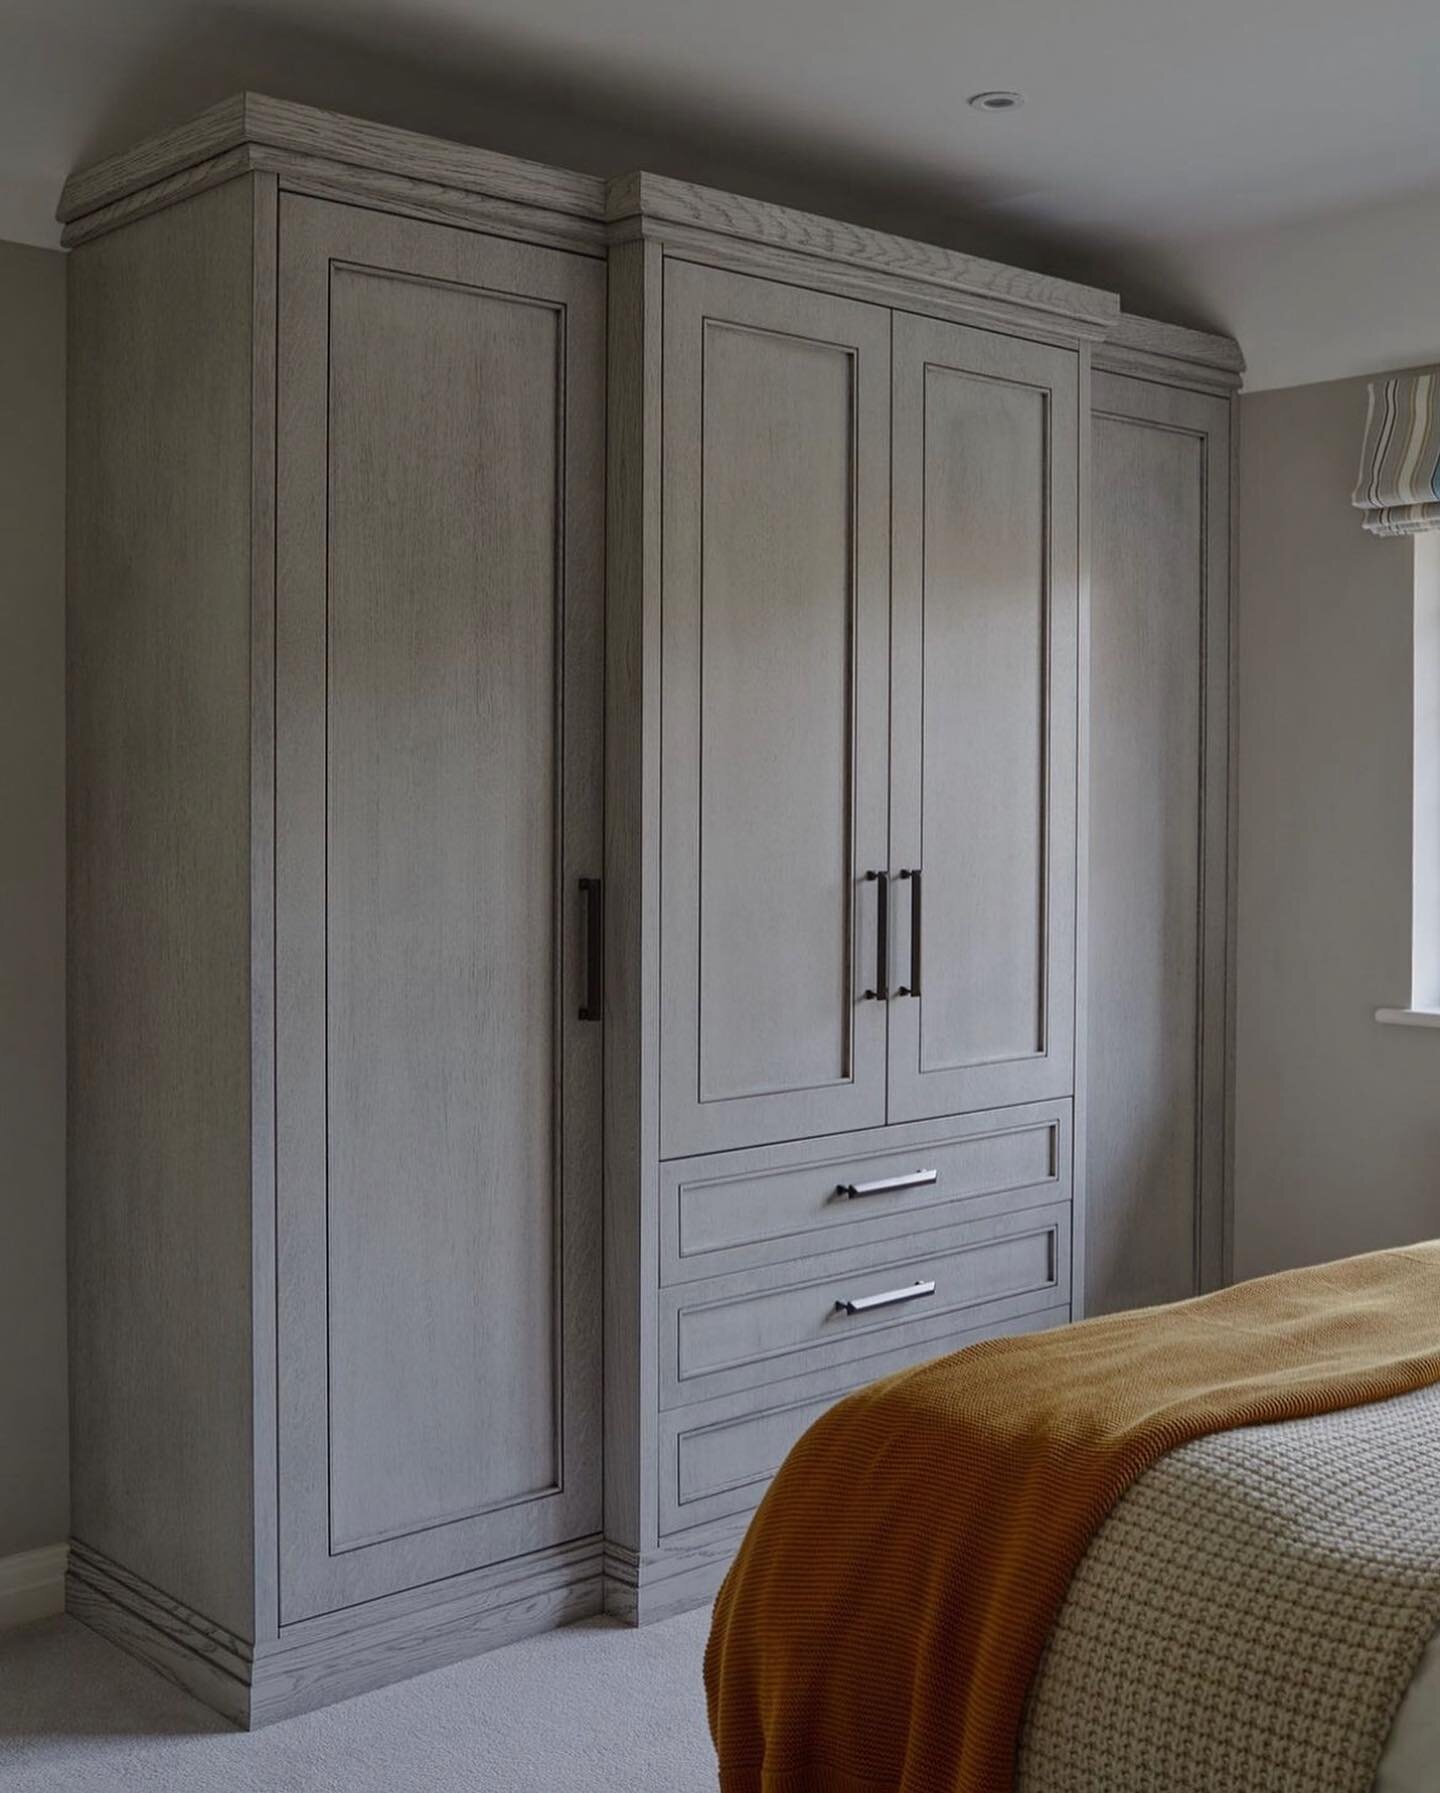 Another angle of the same bedroom. 
The grain of the wood has been enhanced to create a wonderful textured finish on this beautiful bespoke wardrobe.  The details are stunningly simple with clean lines yet add so much warmth to the room.  #rusticchic